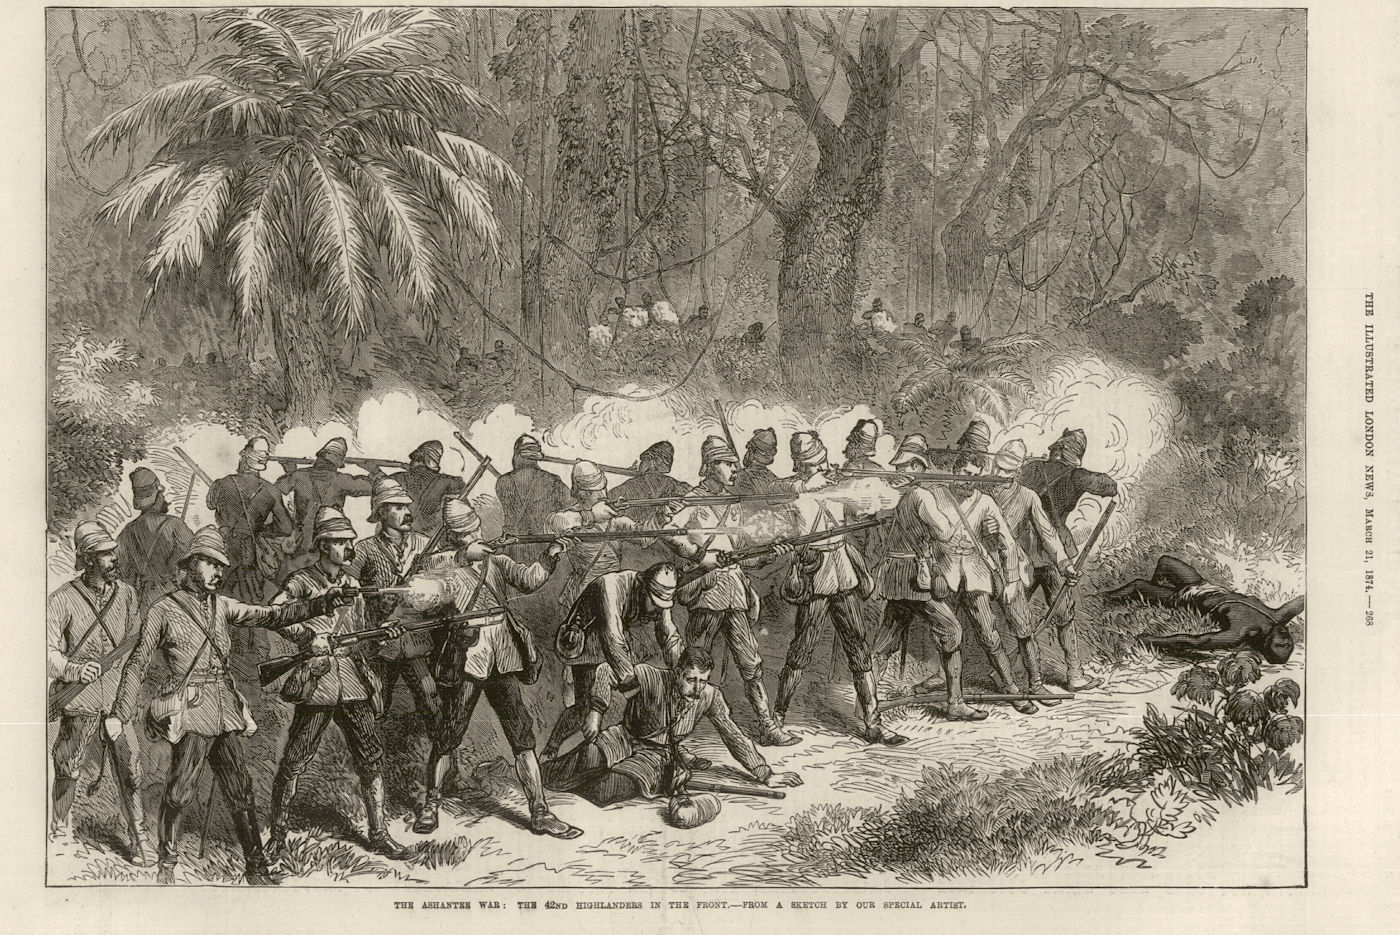 The Third Anglo-Ashanti War: The 42nd Highlanders in the front. Ghana 1874